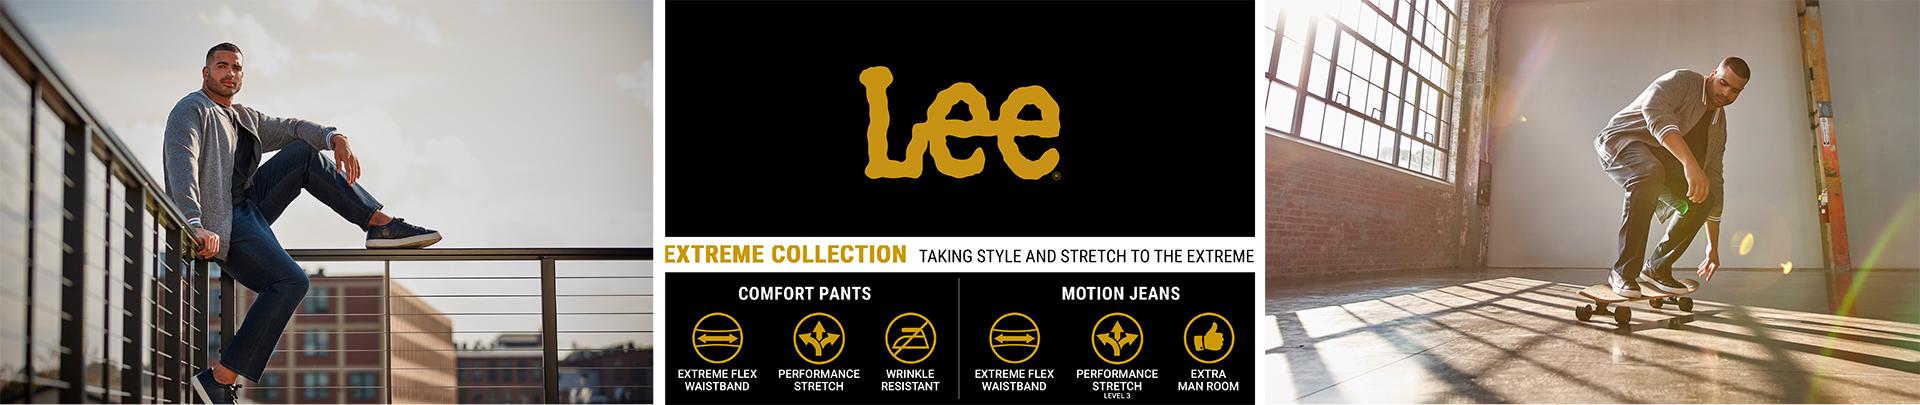 Lee Extreme Collection - Taking Style and Stretch to the Extreme